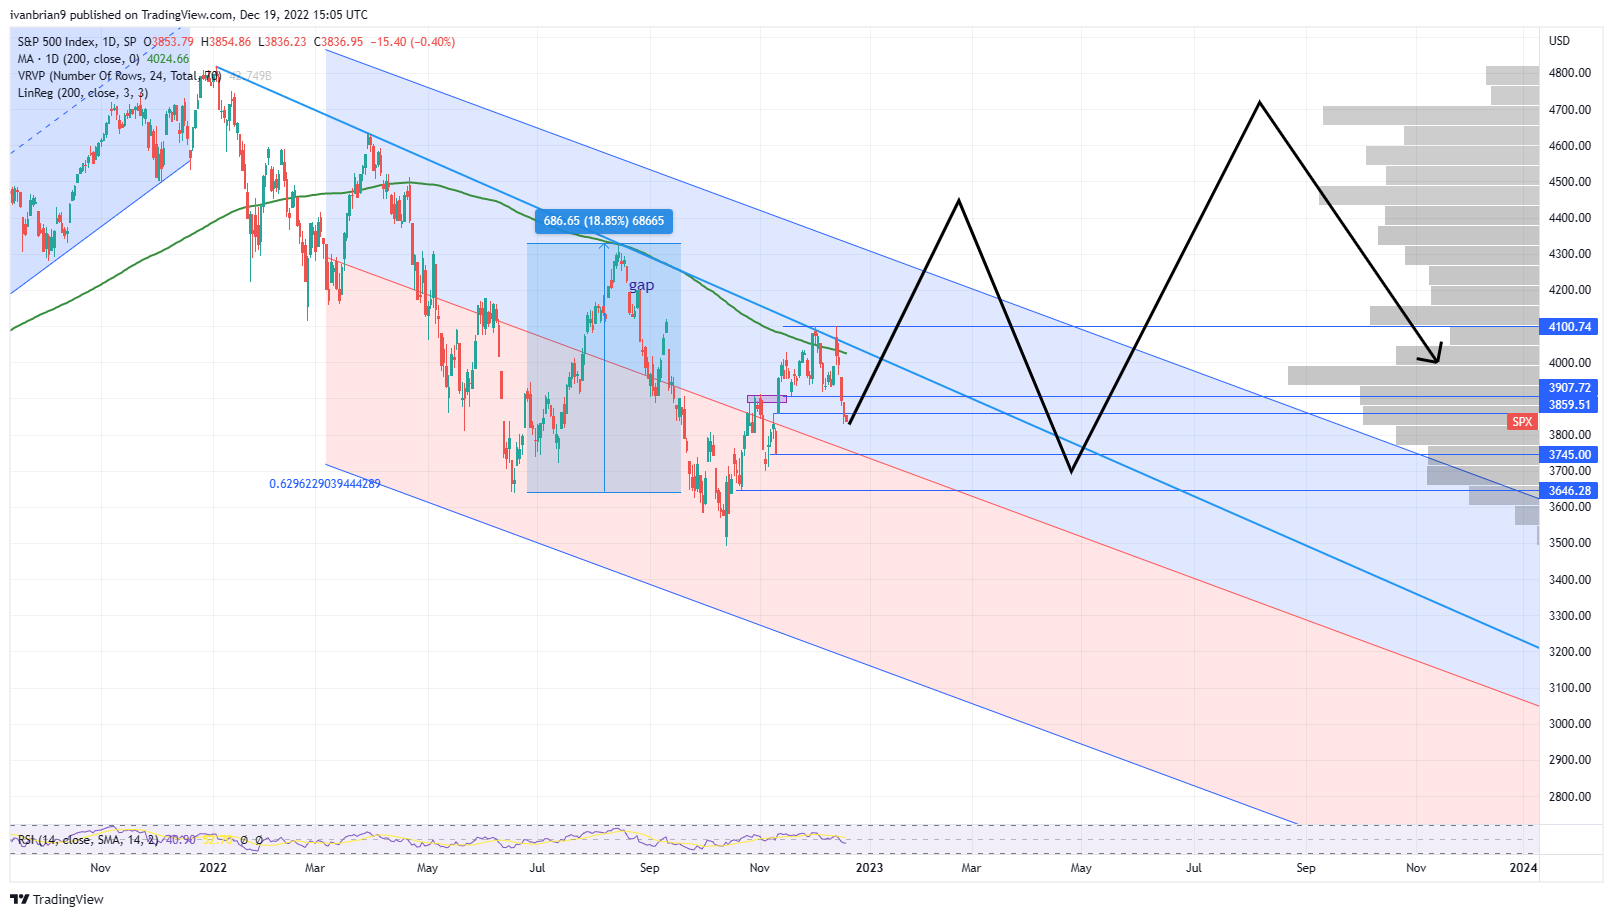 S&P 500 daily chart – SPX forecast for 2023